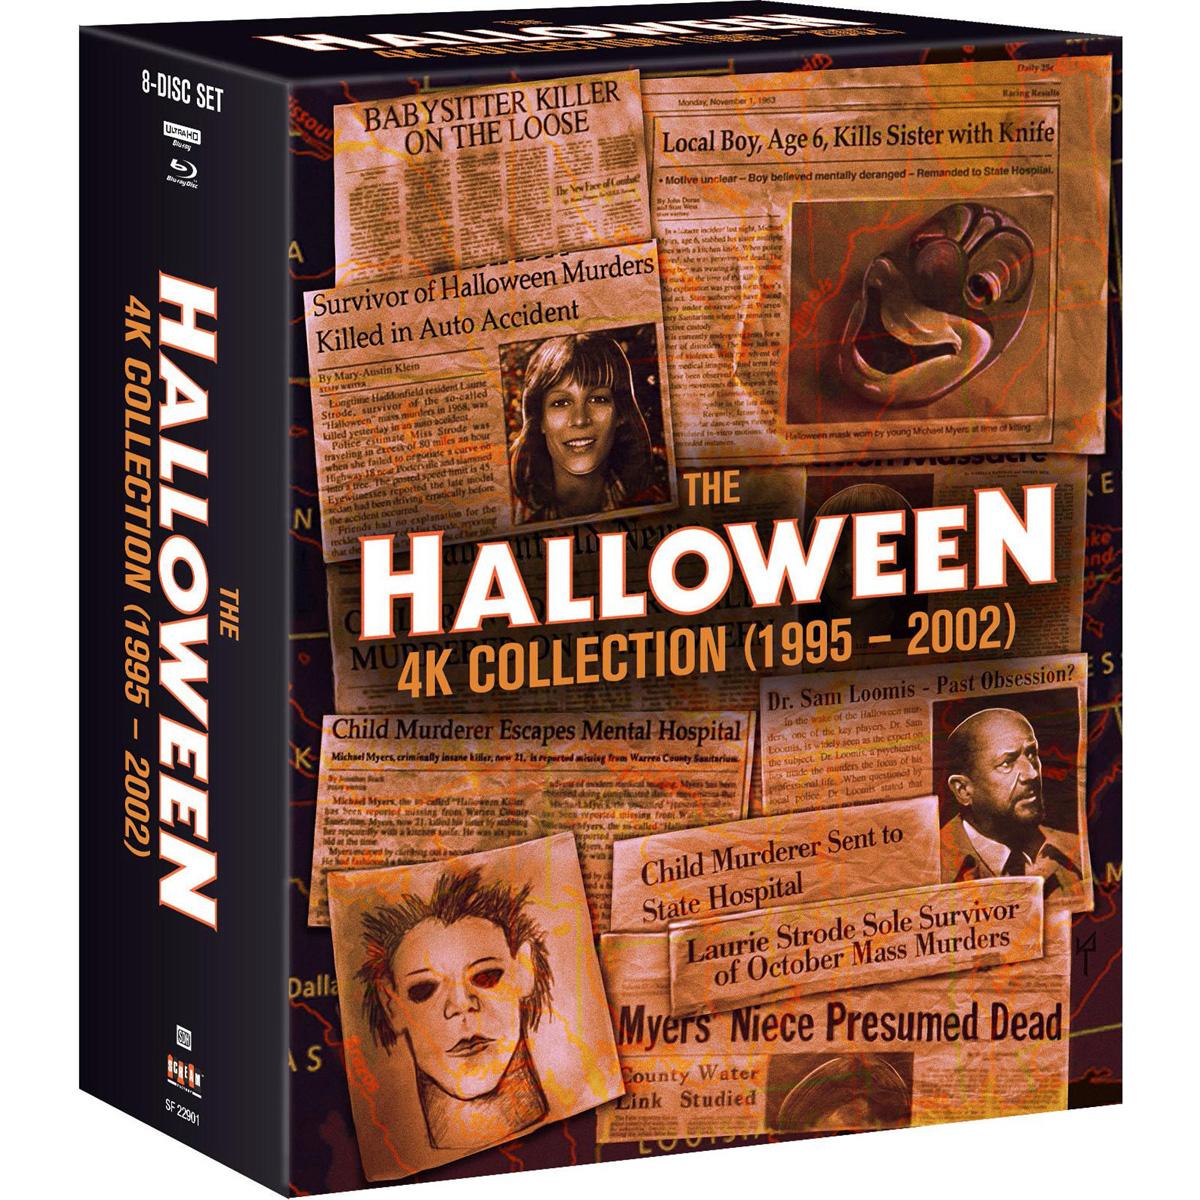 The Halloween 4K Collection Blu-ray Set for $22.98